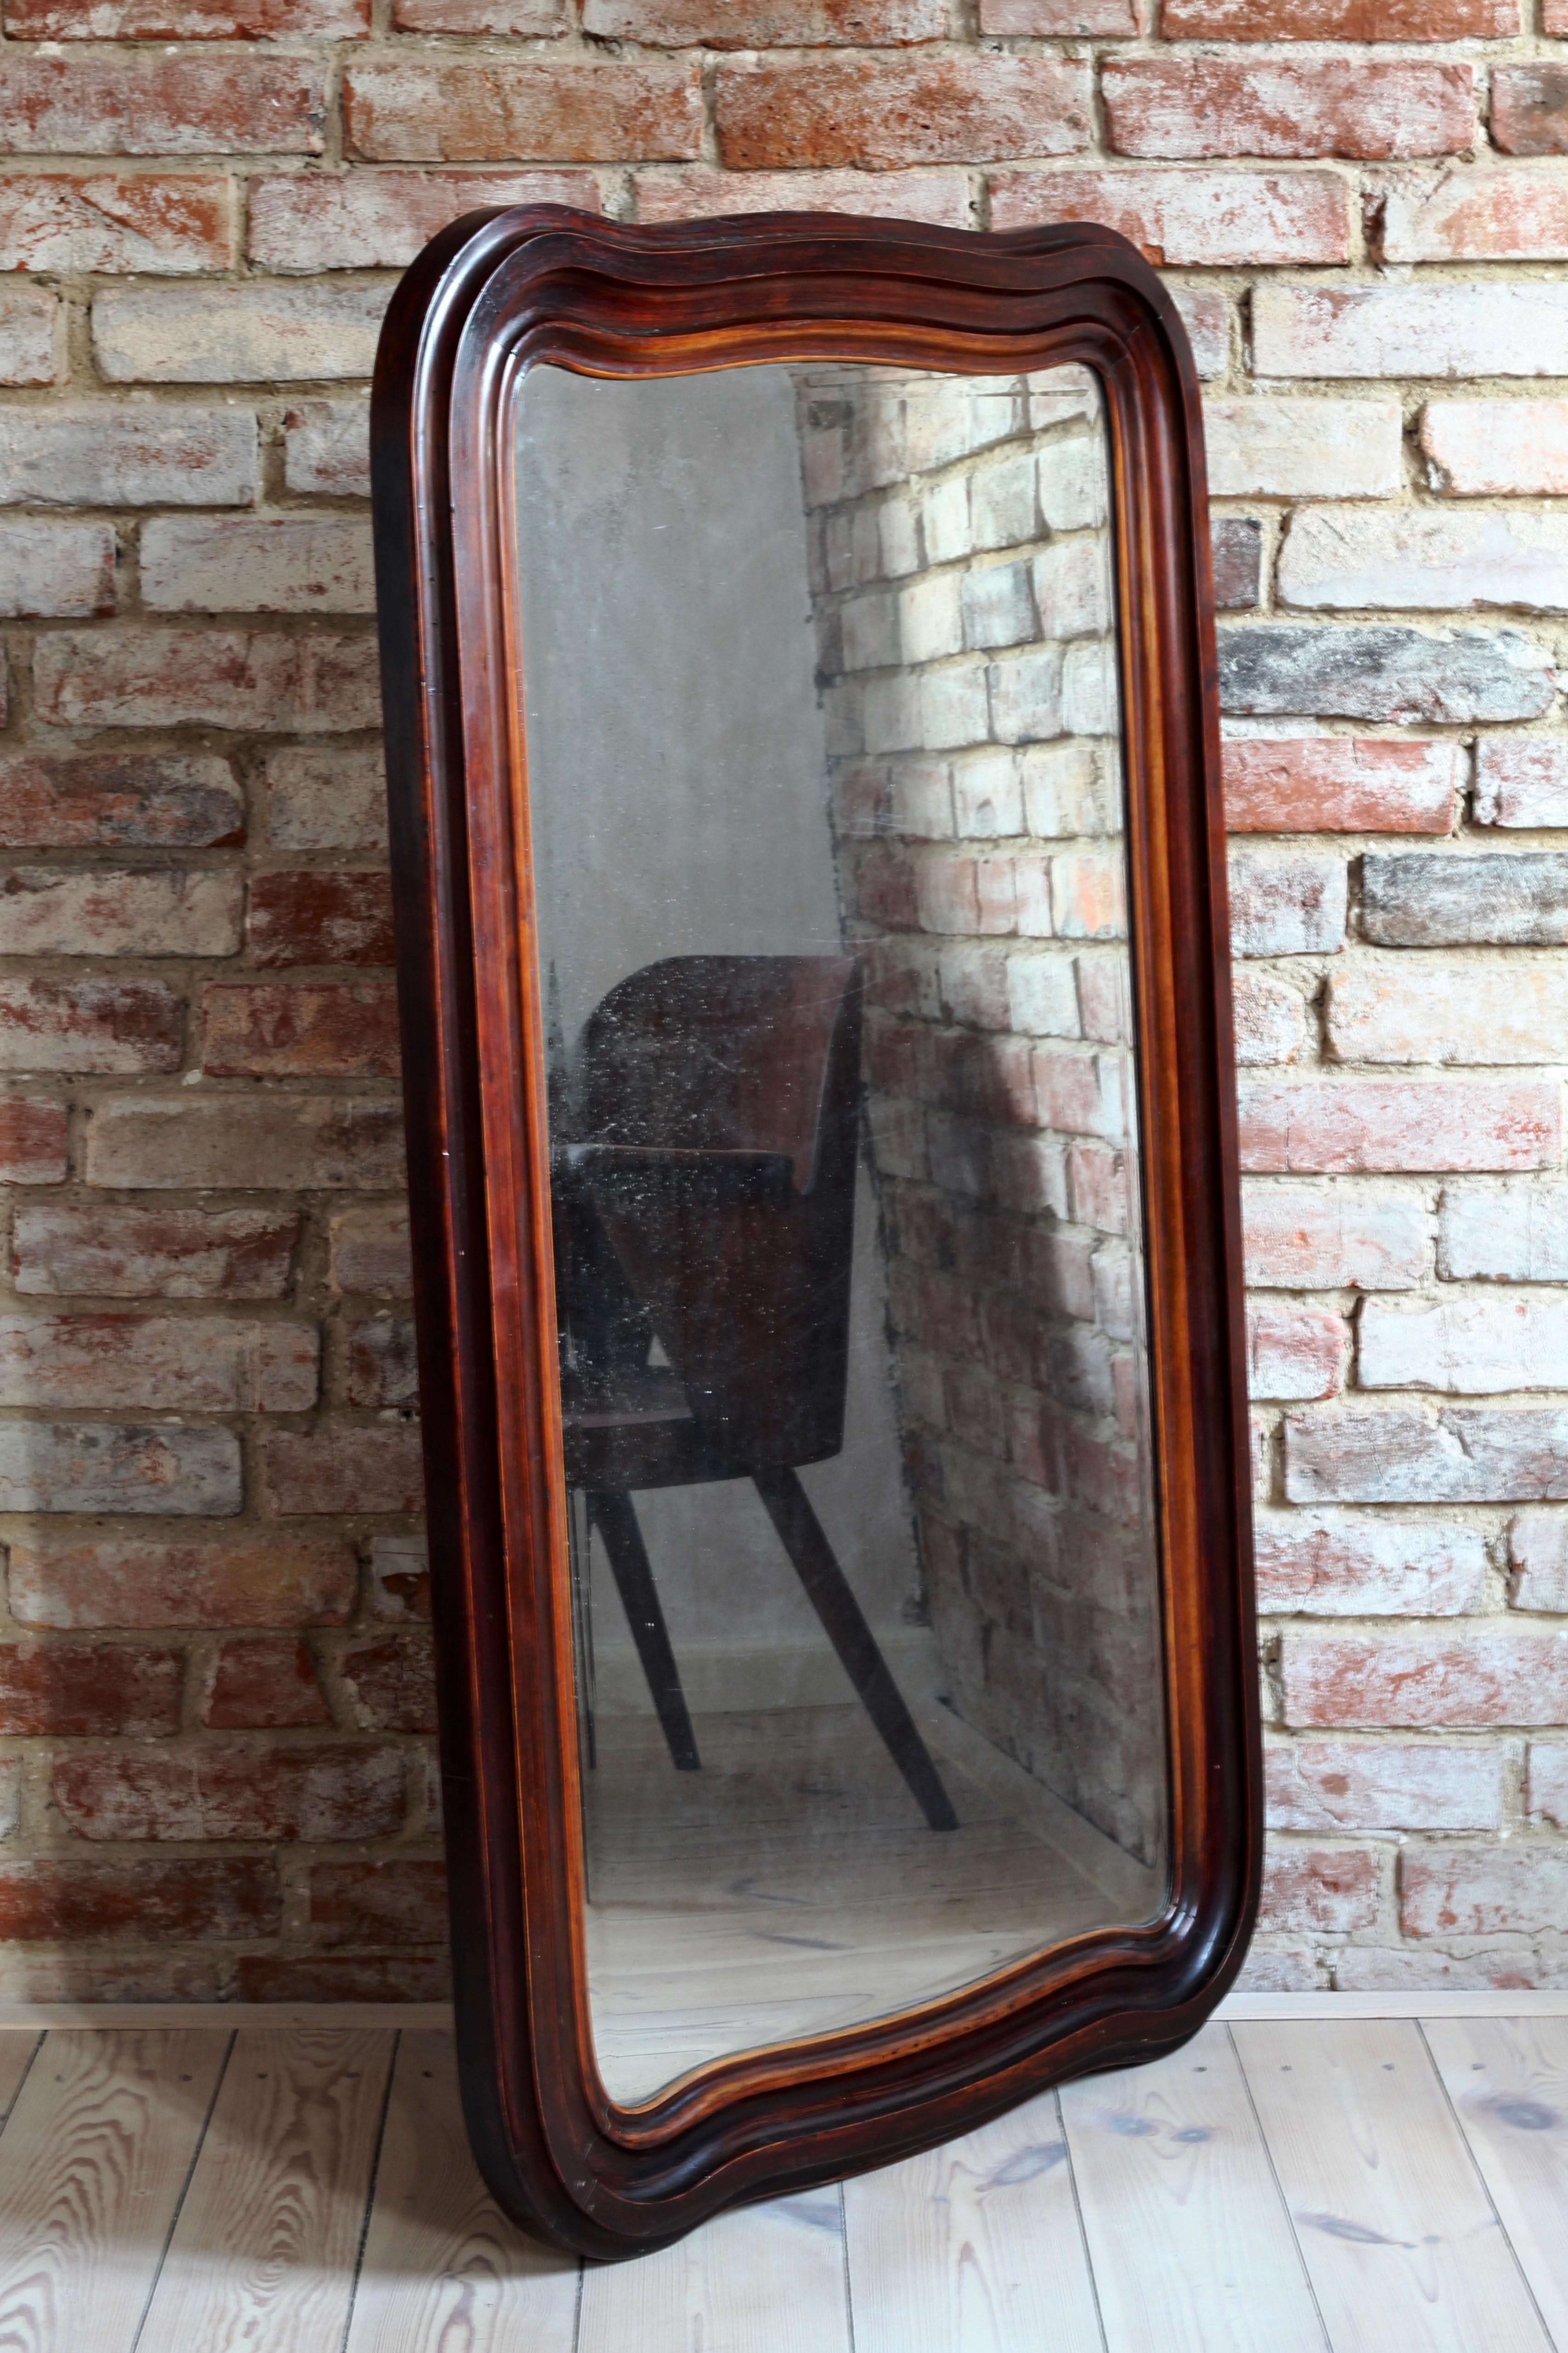 This big antique mirror is a perfect example of how time and patina can decorate an everyday life object. The surface of the mirror is still clear enough to reflect the image but got old in a unique unrepeatable way. The solid wooden frame features